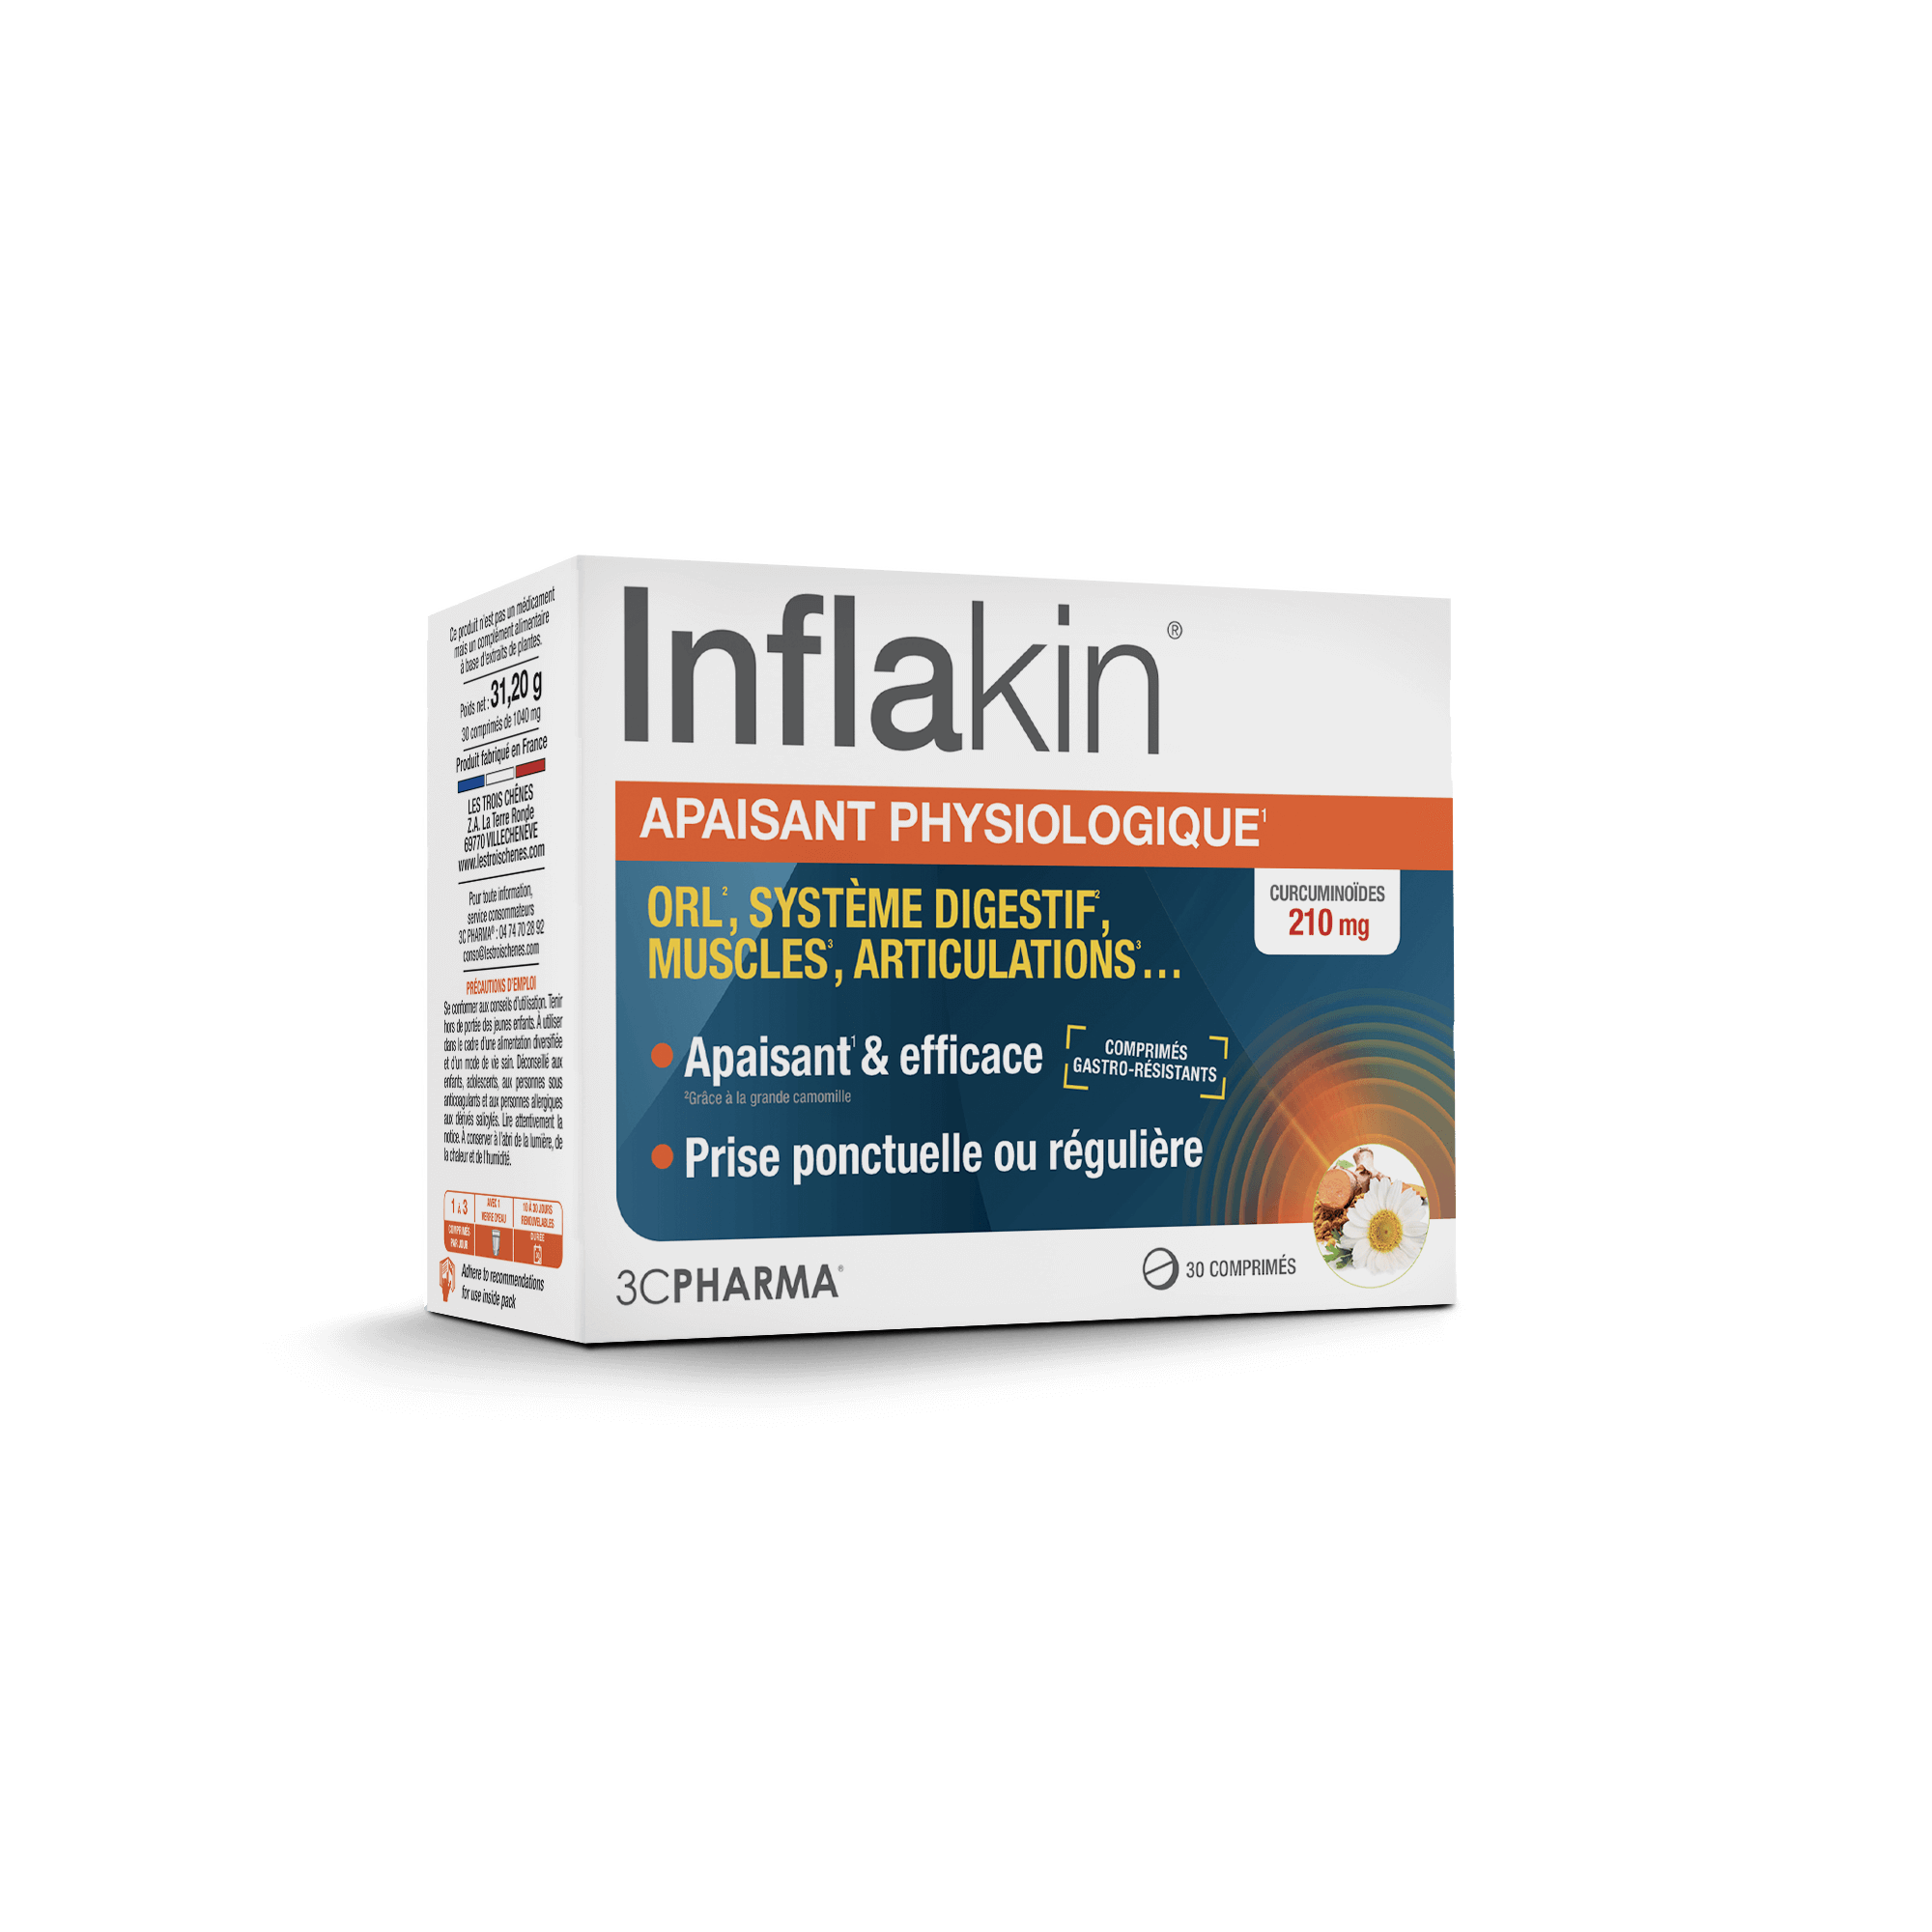 INFLAKIN - APAISANT PHYSIOLOGIQUE - 30 COMPRIMES - 3CPHARMA